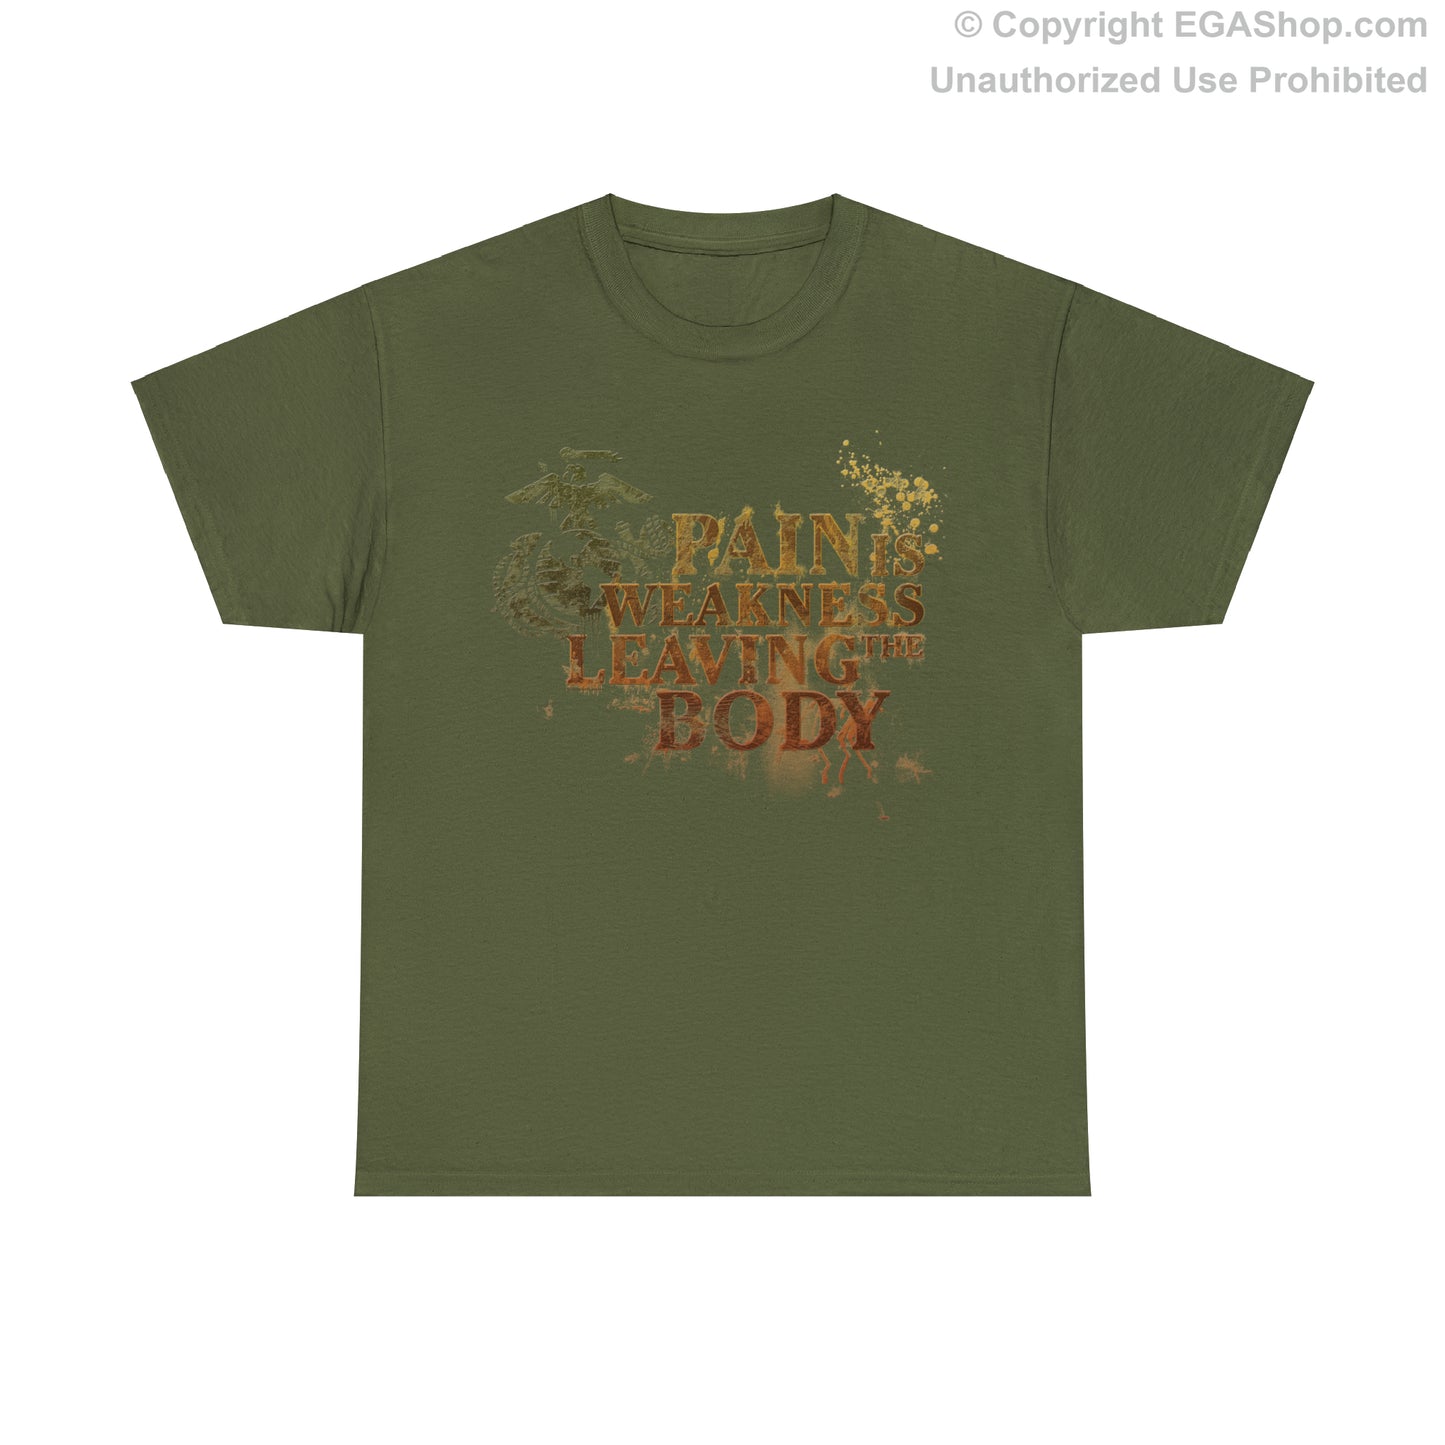 T-Shirt: Pain is Weakness Leaving the Body (Marine Corps)